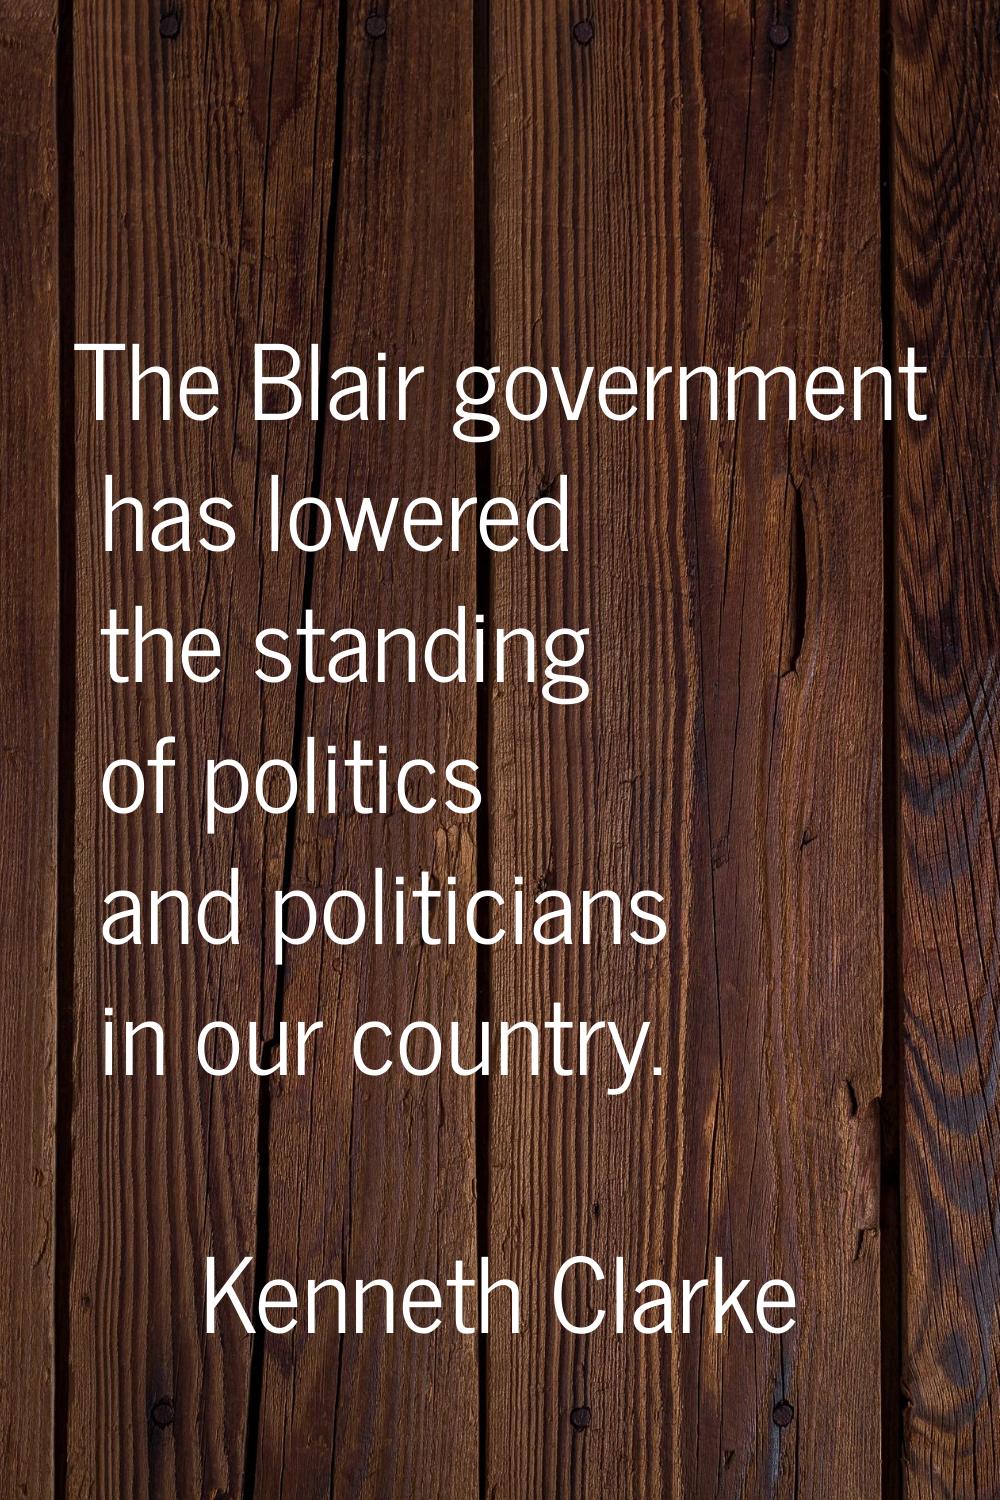 The Blair government has lowered the standing of politics and politicians in our country.